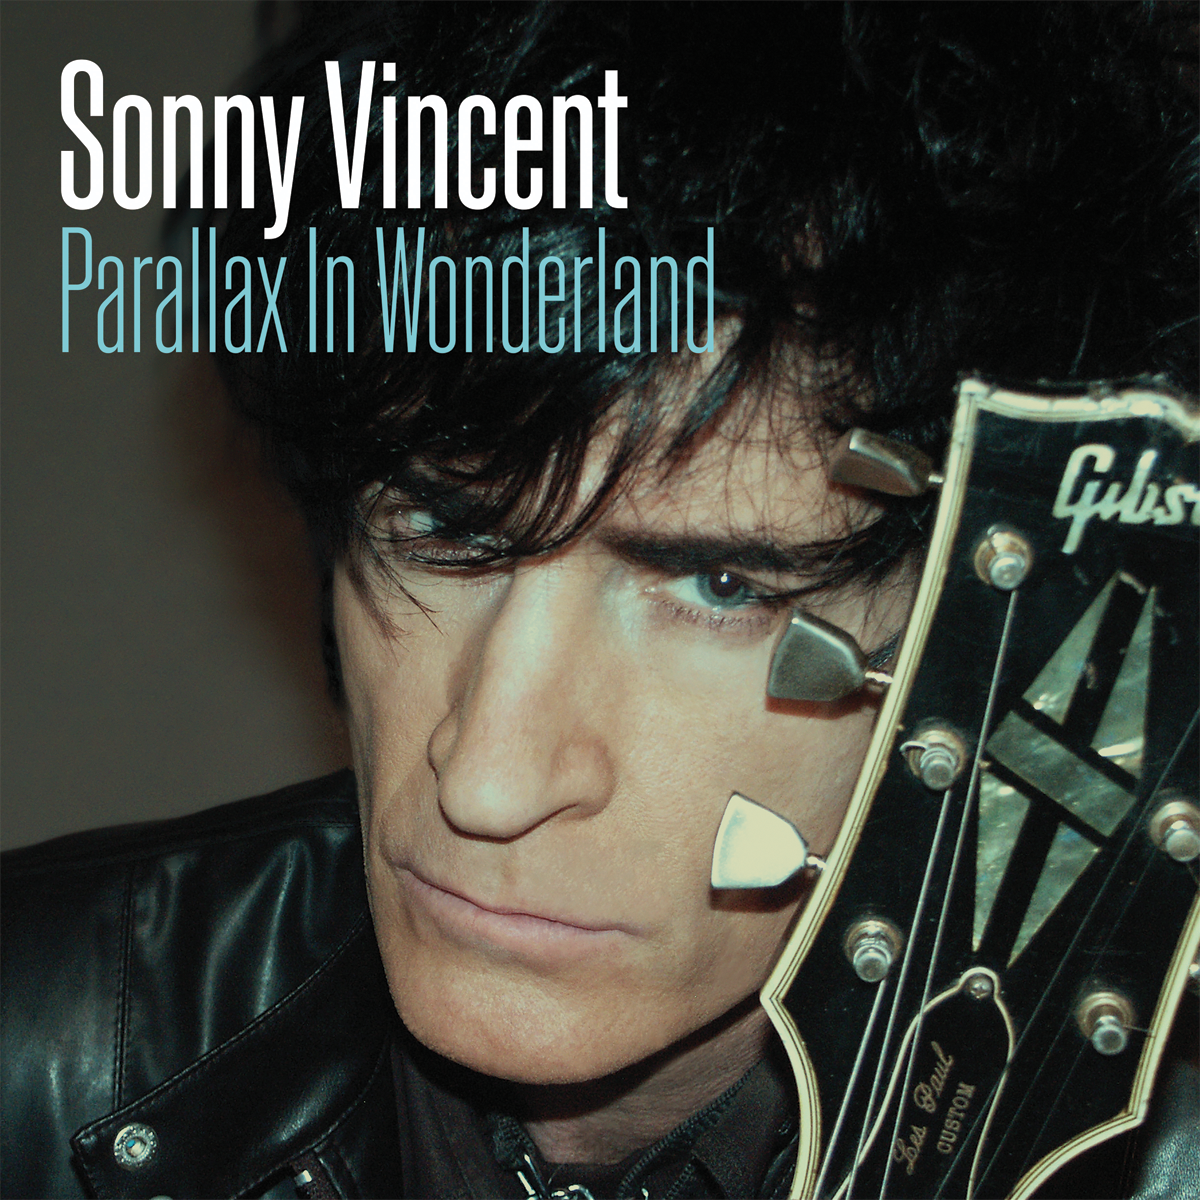 Sonny Vincent- Parallax In Wonderland LP ~REISSUE: WITH DAMNED, STOOGES, MC5 MEMBERS / INCLUDES 2 SIDED GATEFOLD INSERT!